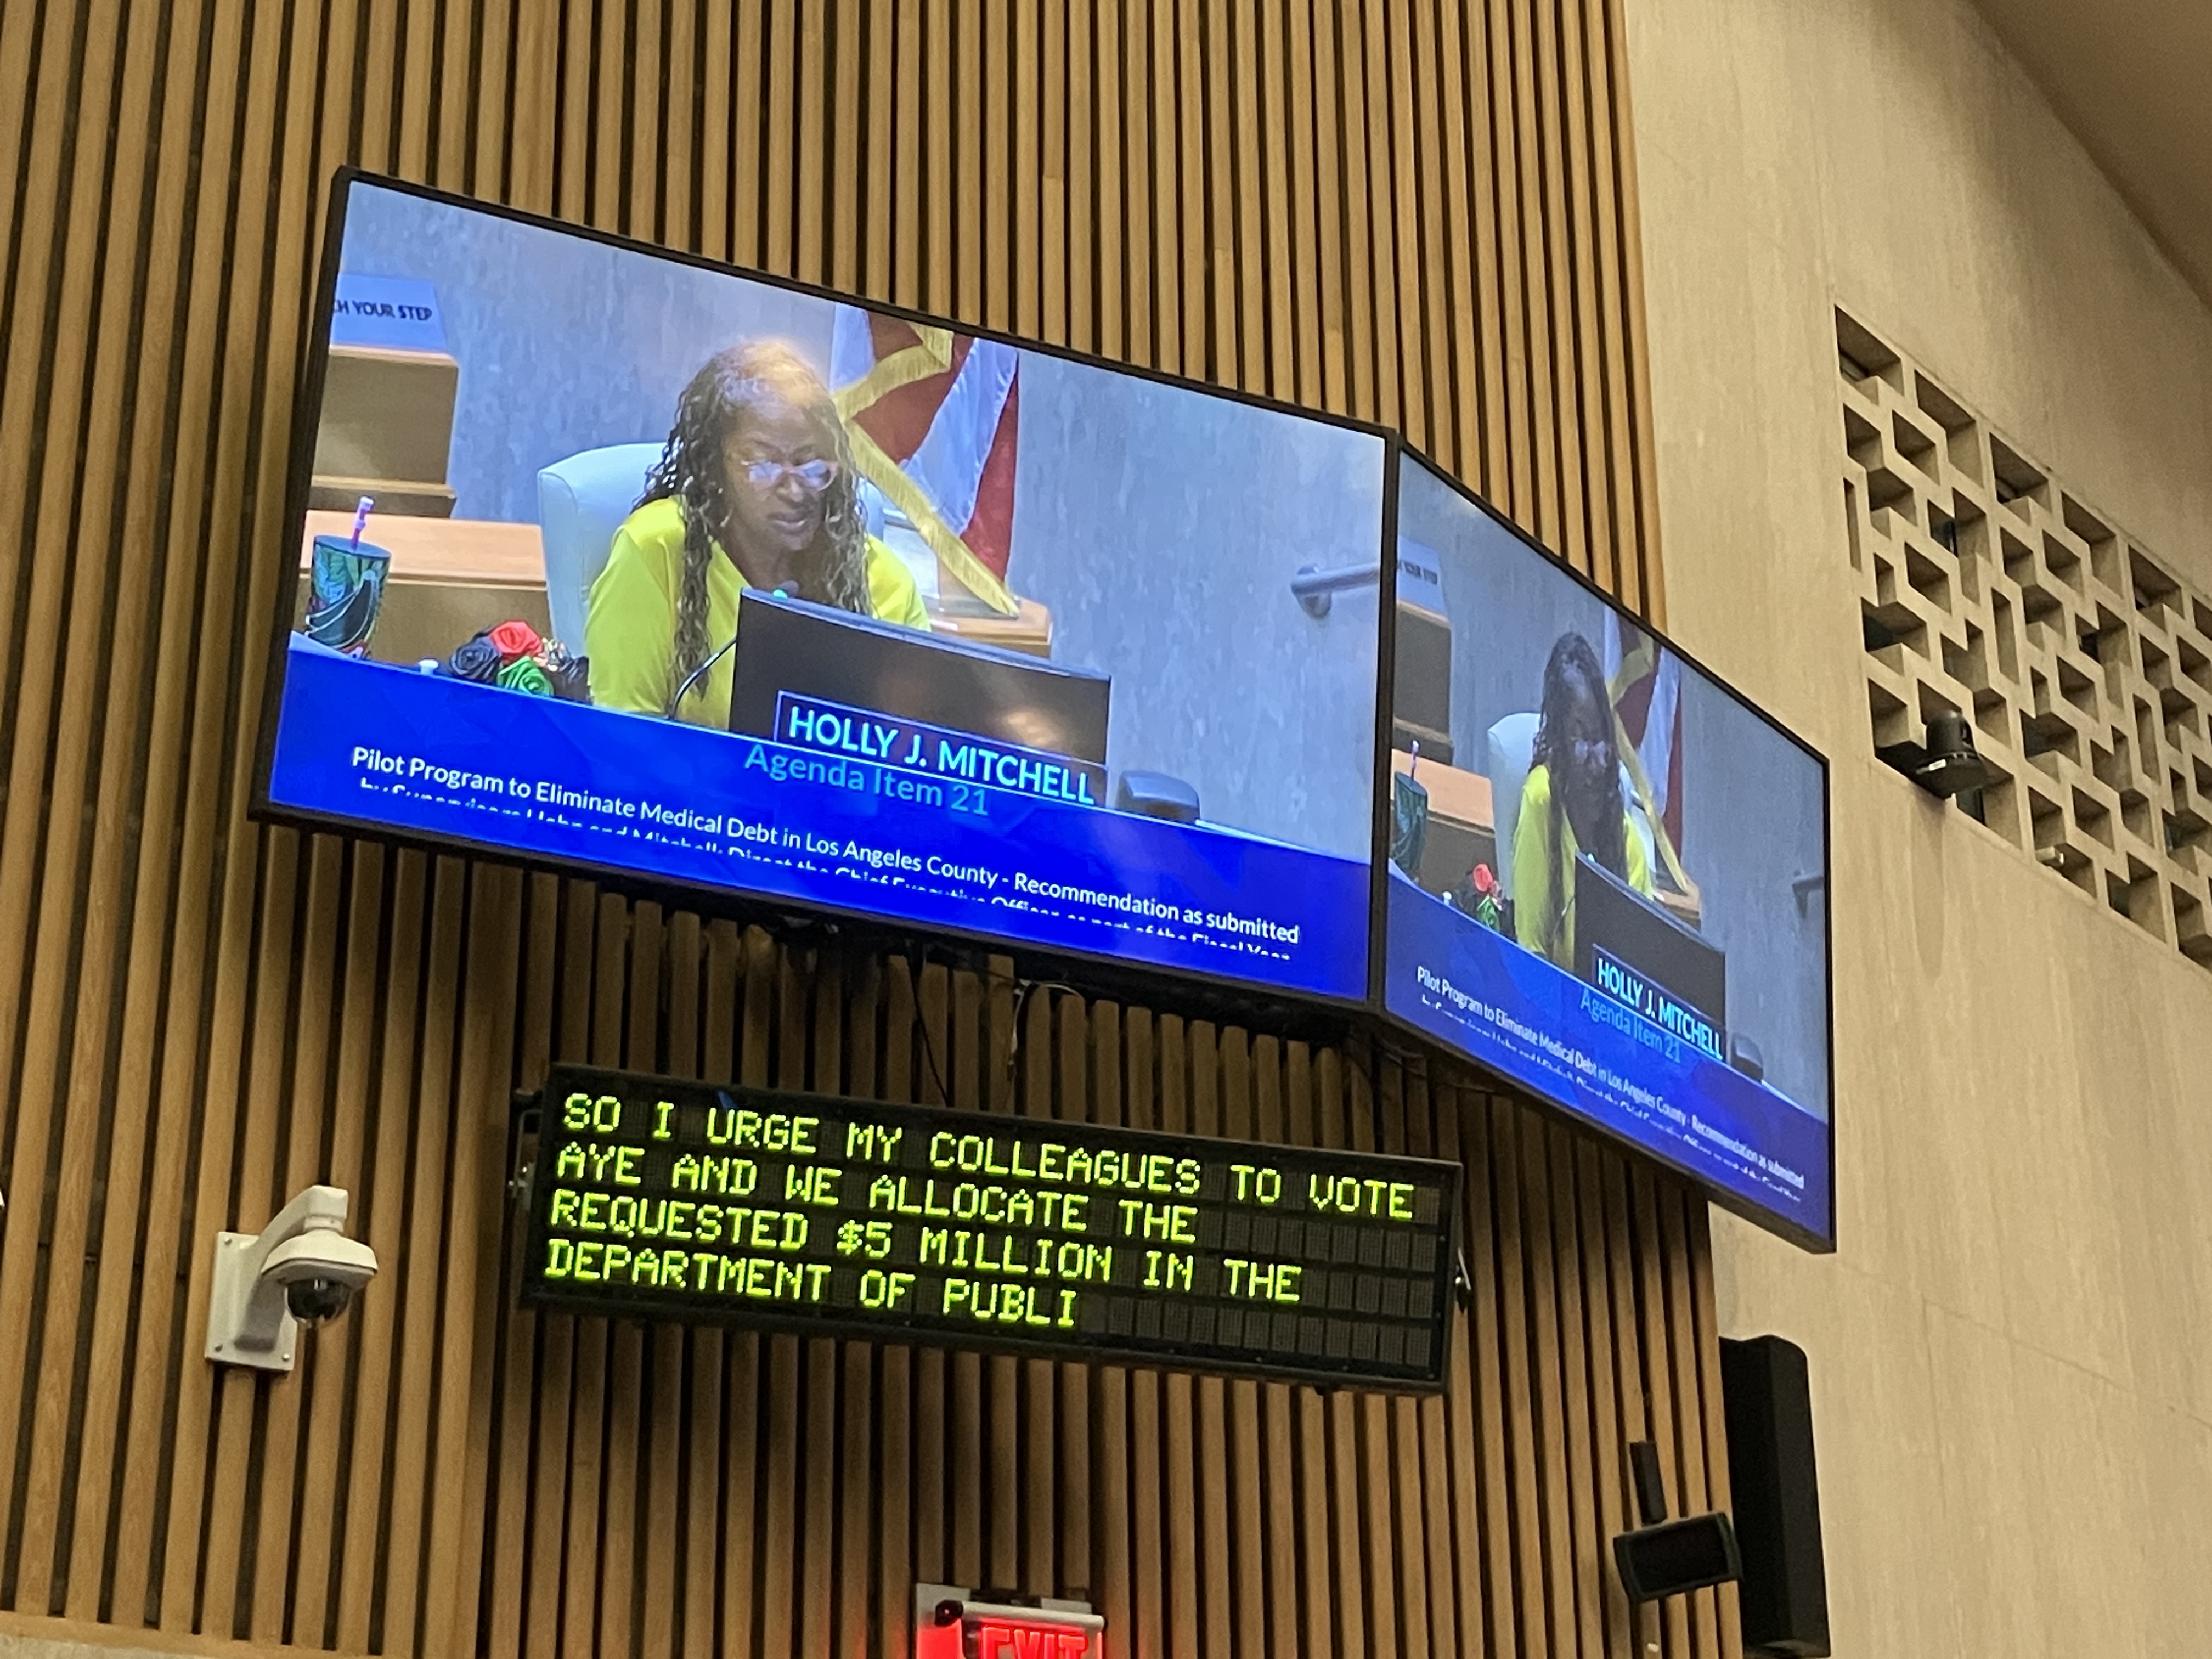 Los Angeles County Supervisor Holly Mitchell is shown on a TV screen in the court room. A screen below the TV shows in text that she is saying, "So I urge my colleages to vote aye and we allocate the requested $5 million in the Department of Publi[c]..."